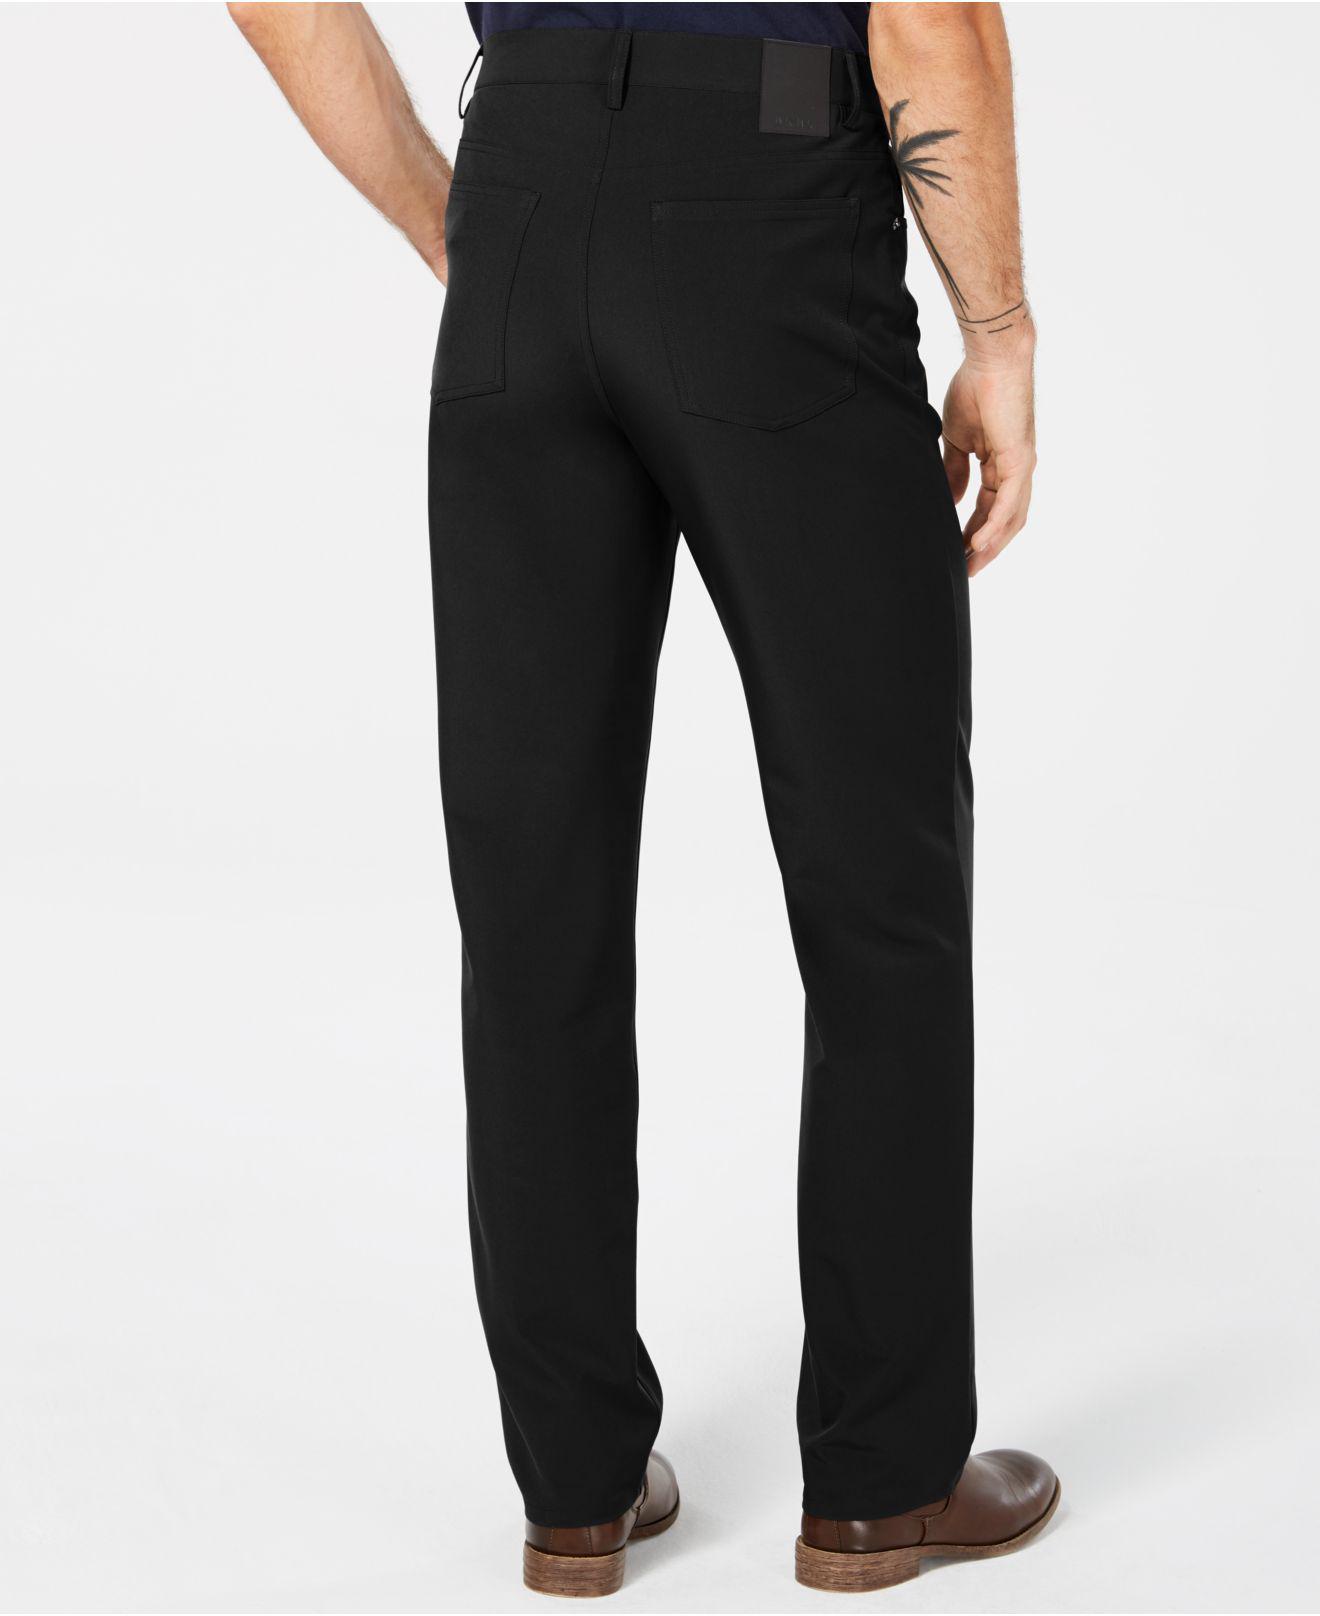 DKNY Synthetic Slim-fit Stretch Tech Pants in Black for Men - Lyst